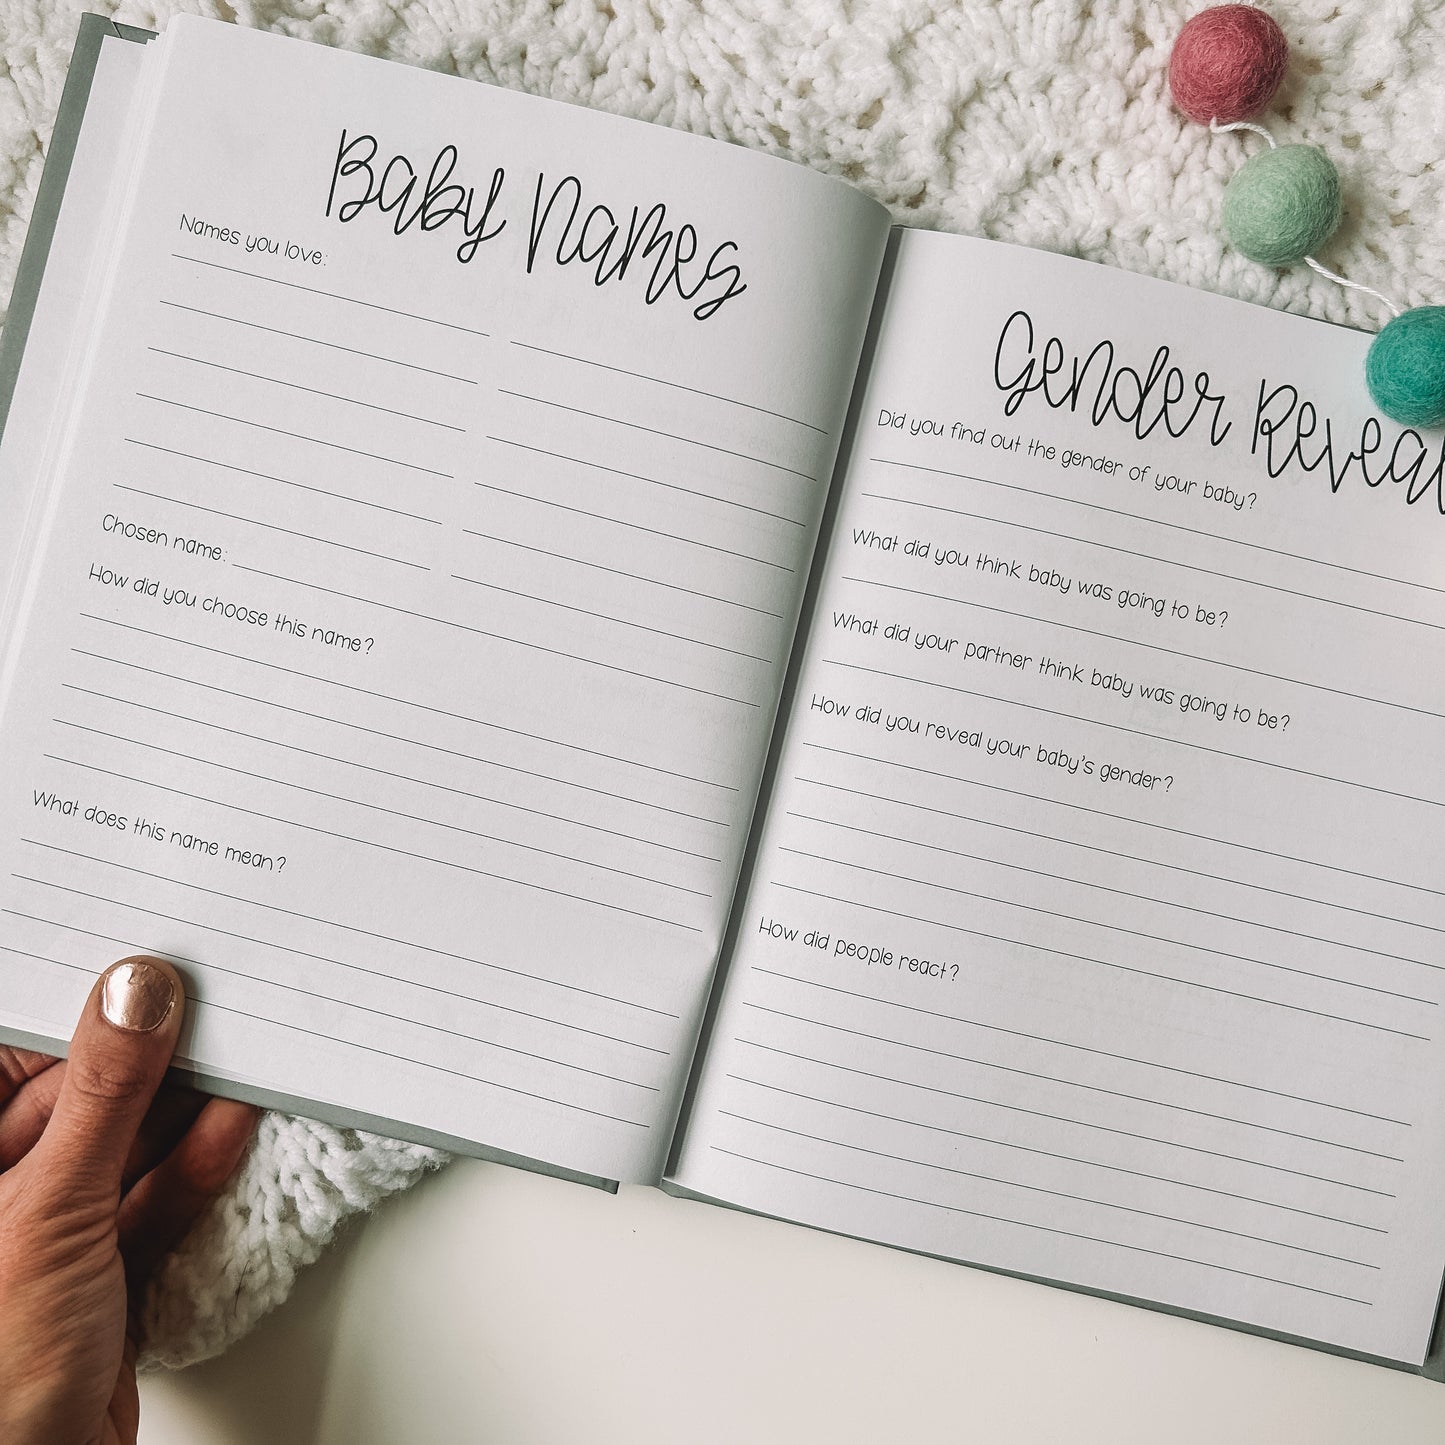 Two page spread features Baby Names on the left page with lines to record names, the chosen name and two additional prompts. The right page is titled Gender Reveal with five prompts.